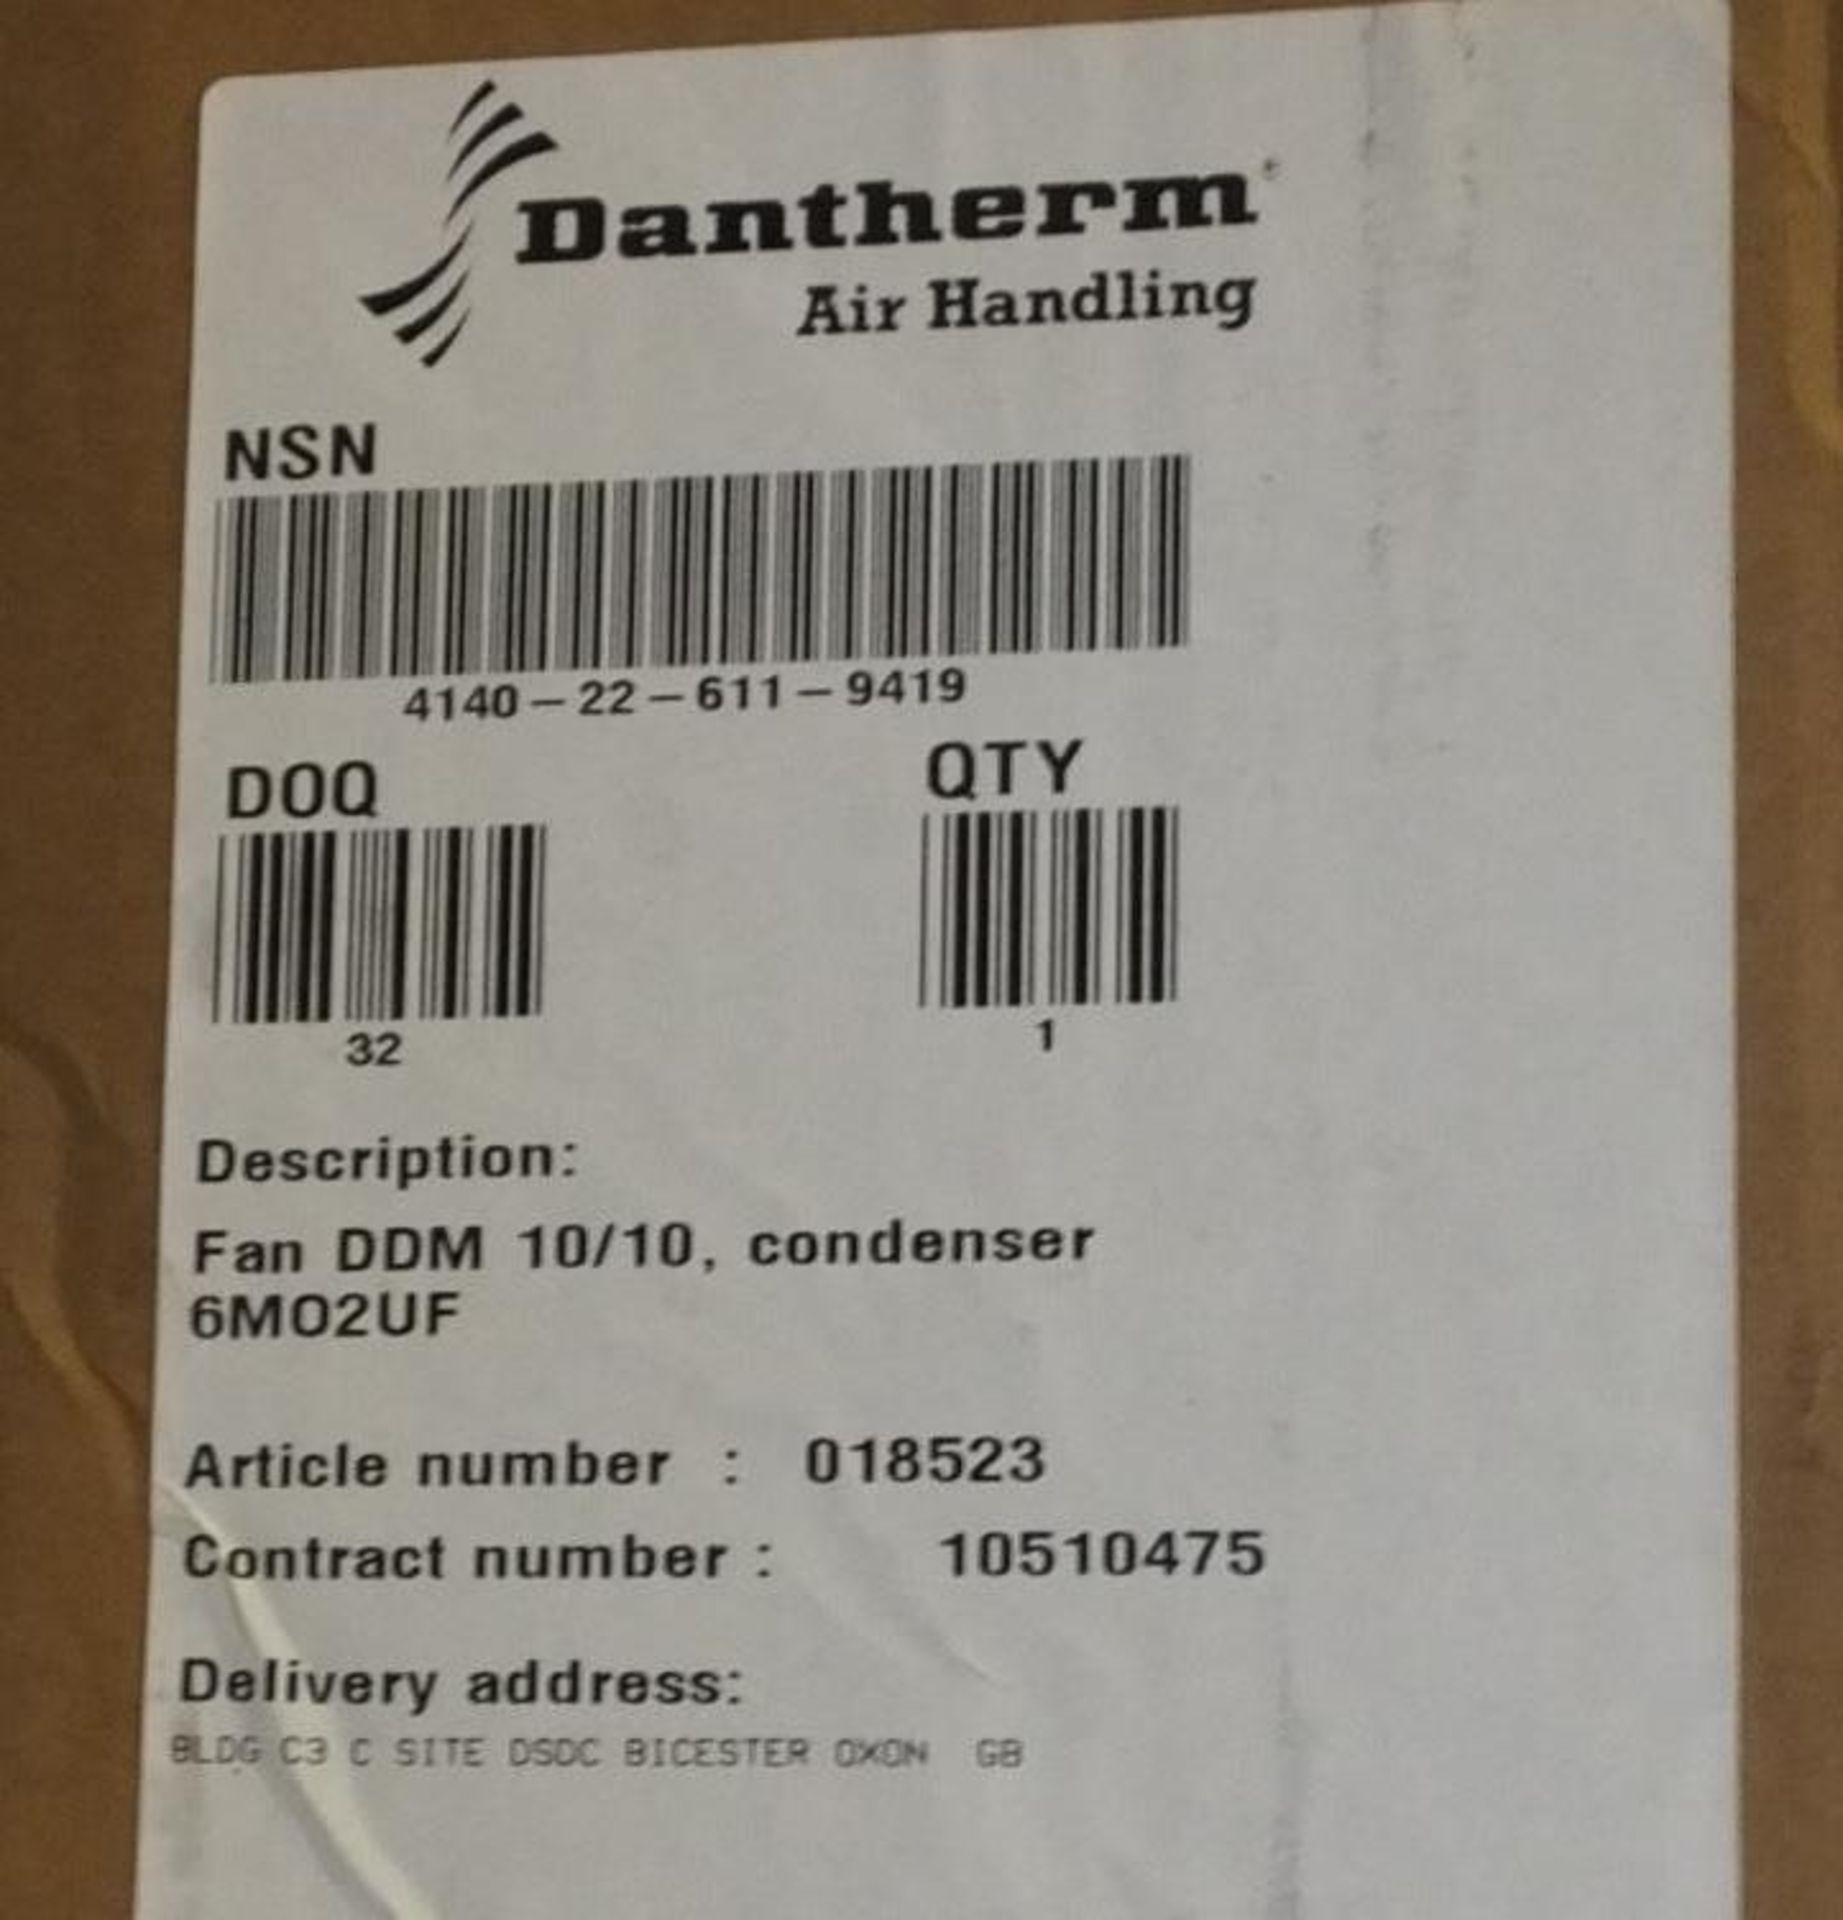 Dantherm Spares 4140226119419 Fan DDM 10/10 Condenser 6MO2UF - Image 3 of 3